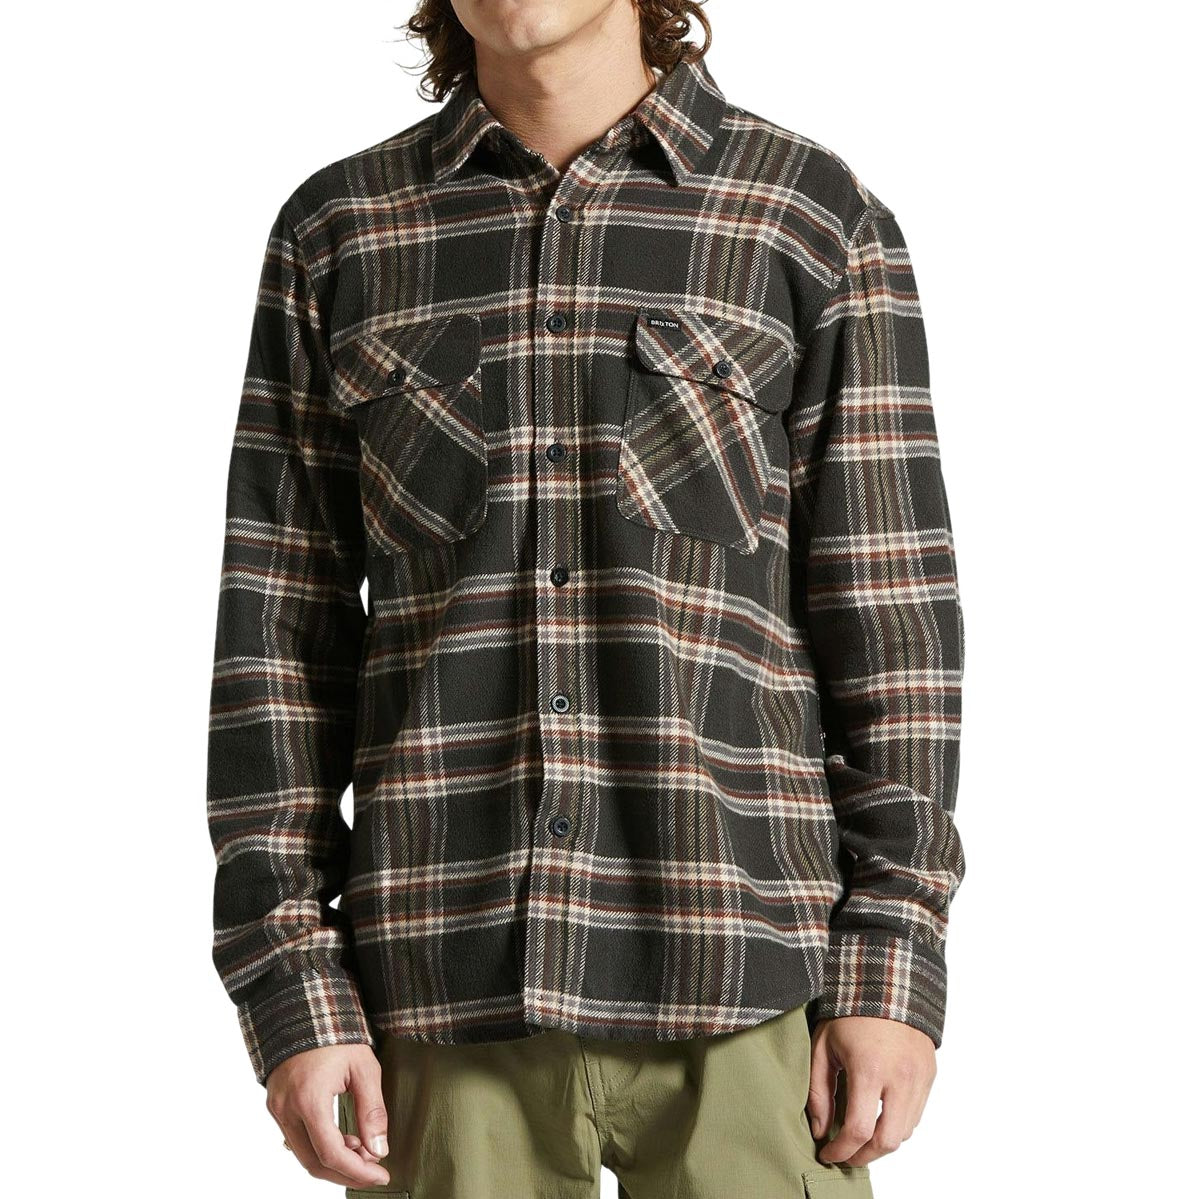 Brixton Bowery Flannel Long Sleeve Shirt - Black/Charcoal/Off White image 1